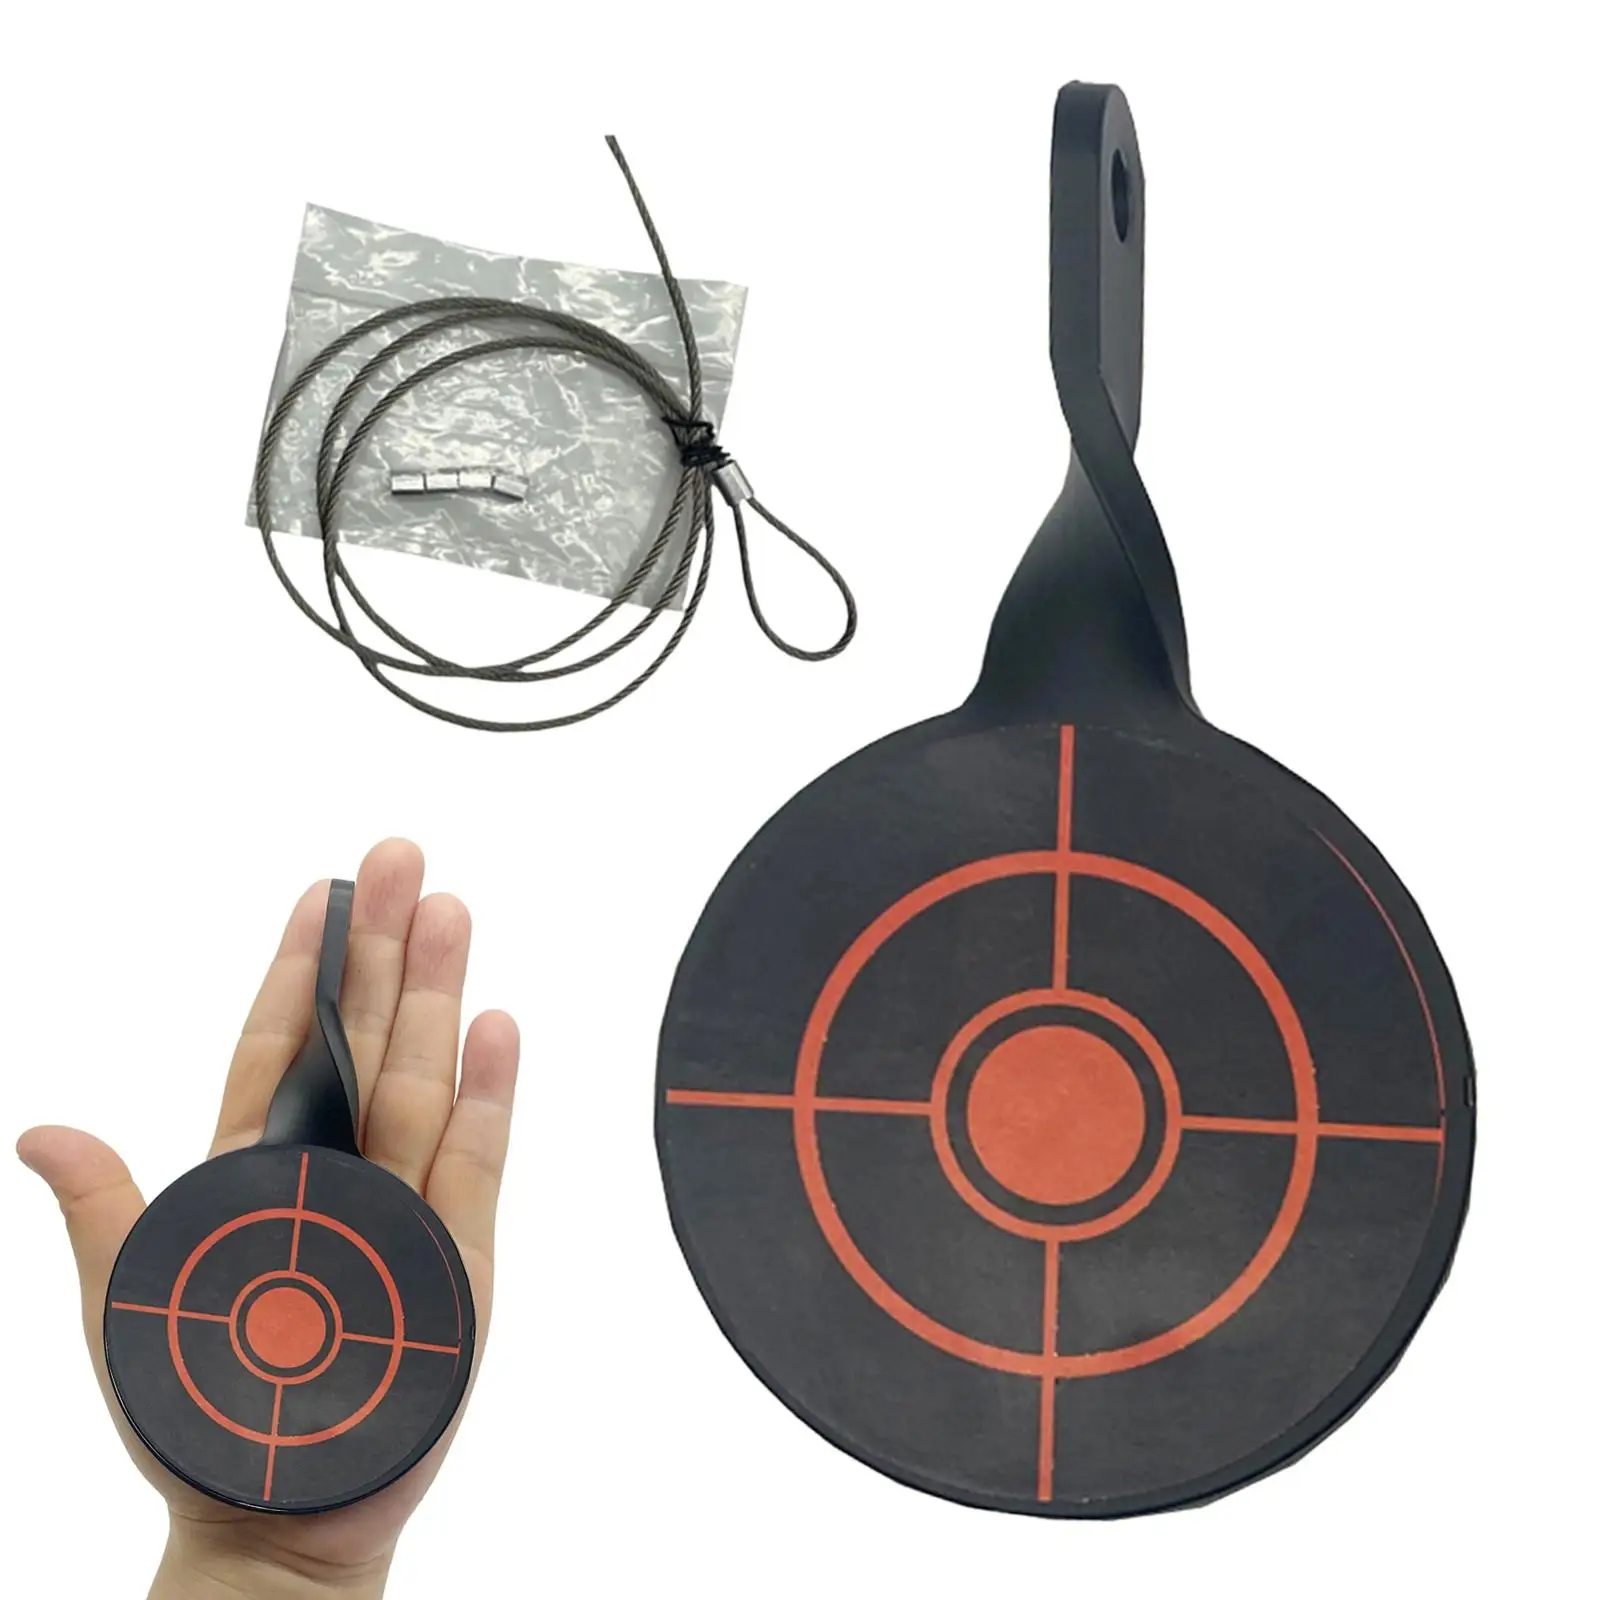 Resetting Targets with 10Pcs Stickers and Spots for Outdoor, Range, and Hunting Diameter 8cm